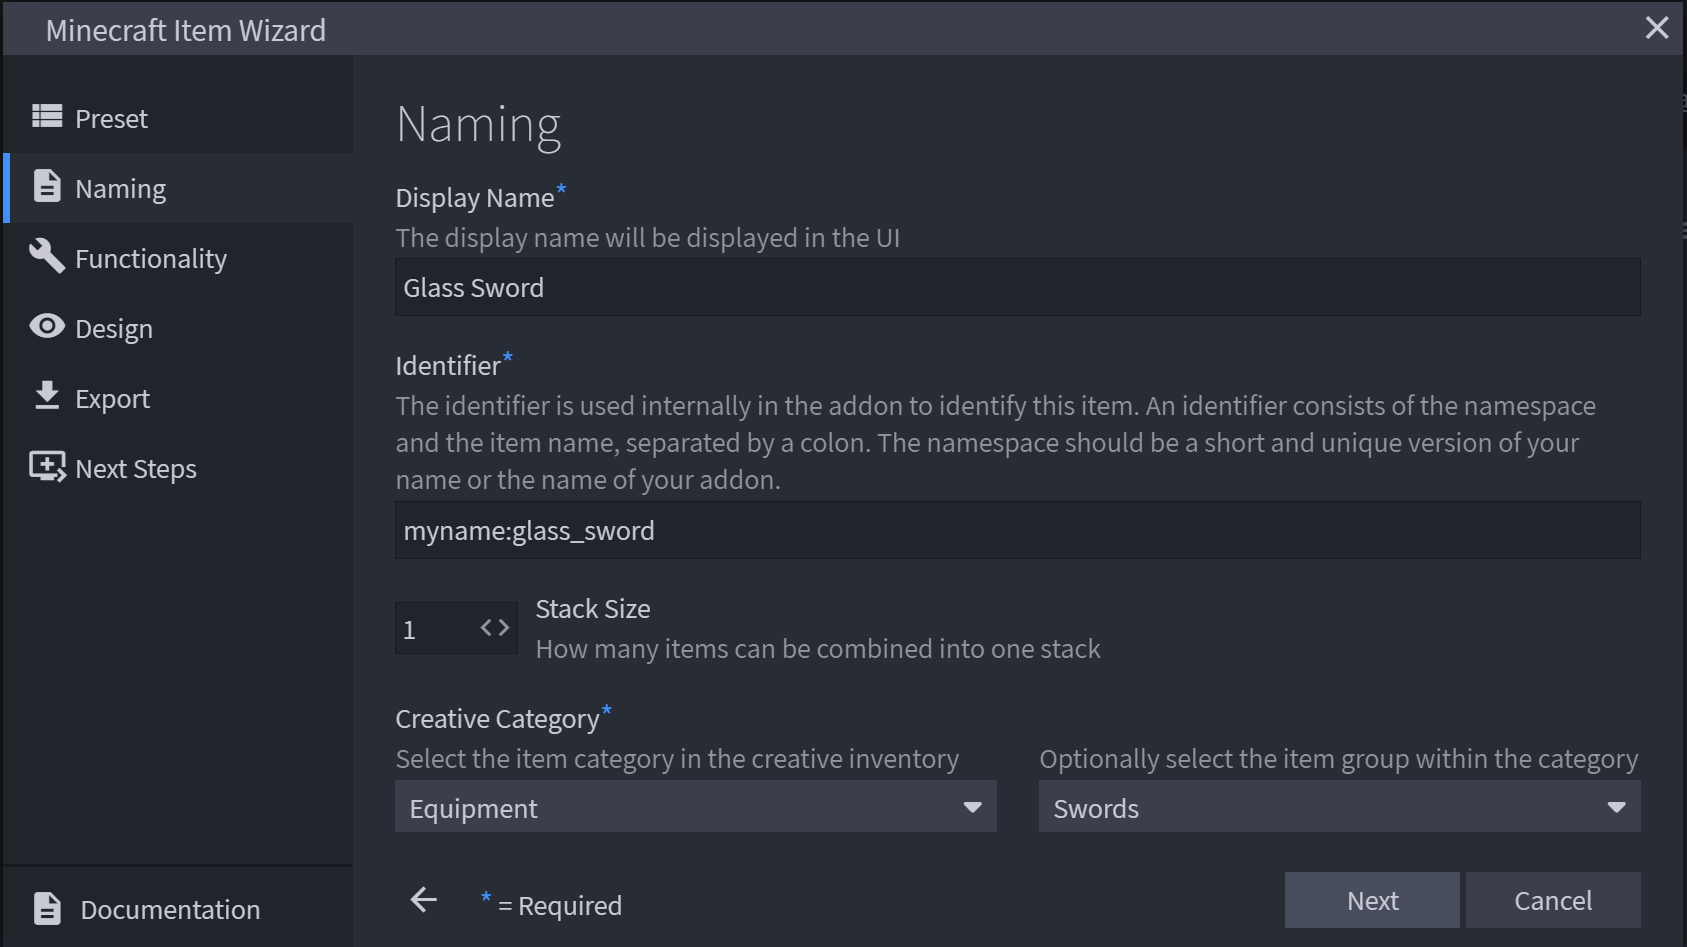 Naming screen in Blockbench showing the Display Name, Identifier, Stack Size, and Creative Category fields.